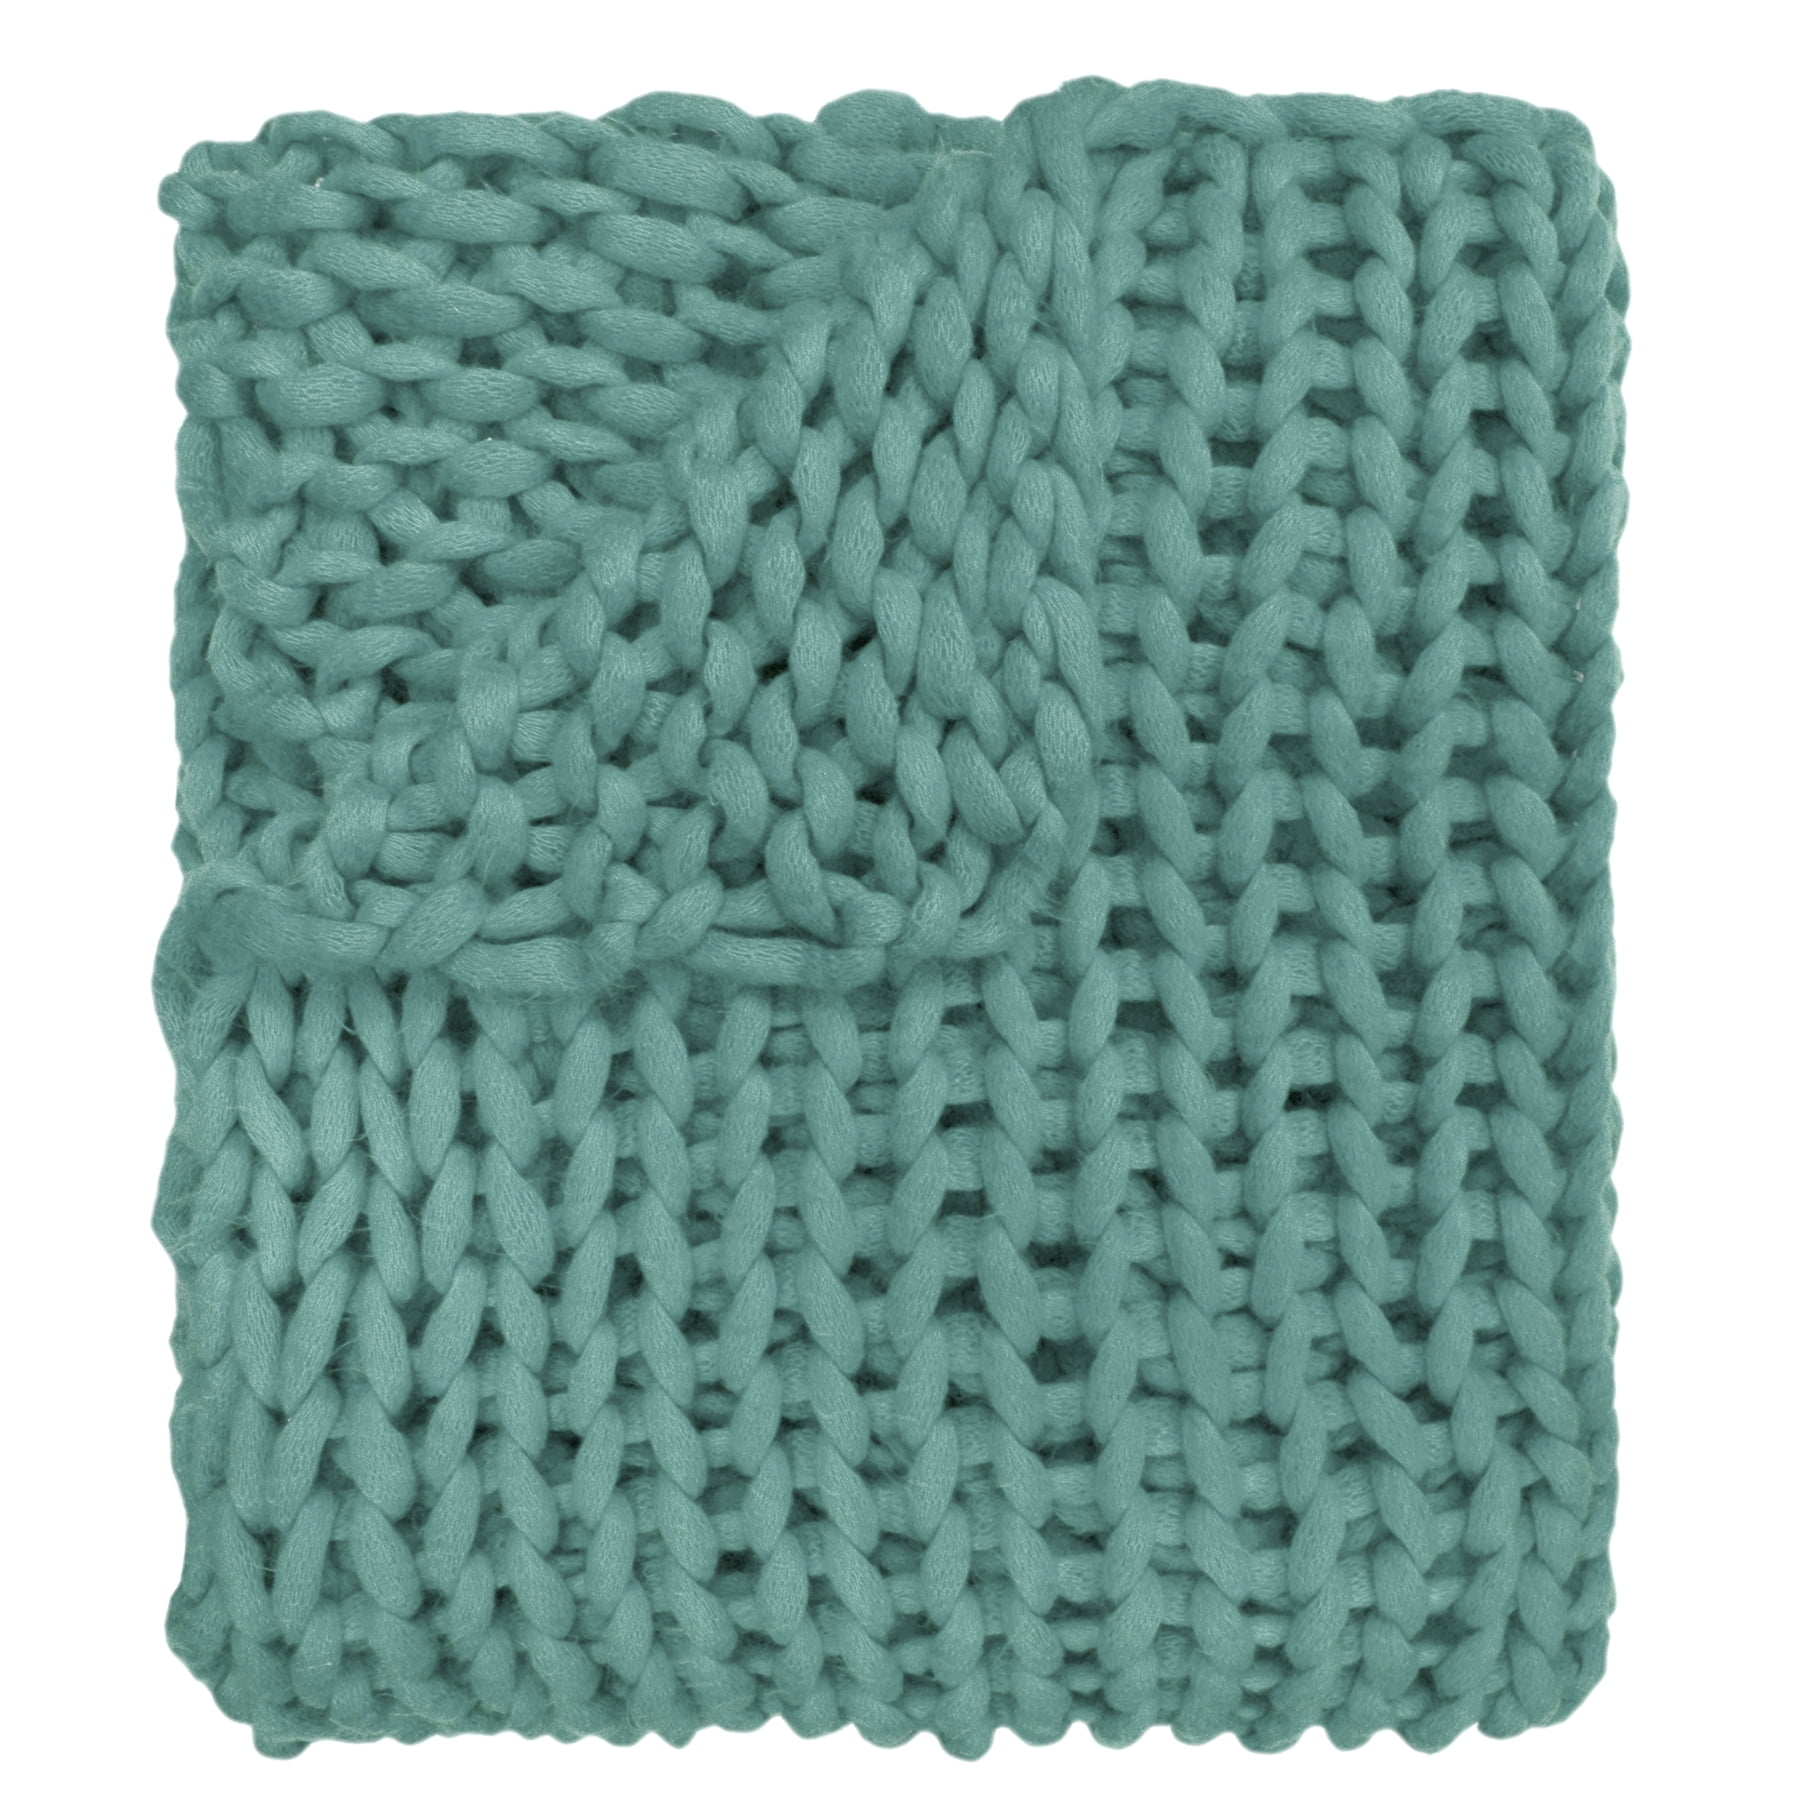 Picture of American Heritage Textiles 70002 40 x 50 in. Chunky Knit Throw, Aqua